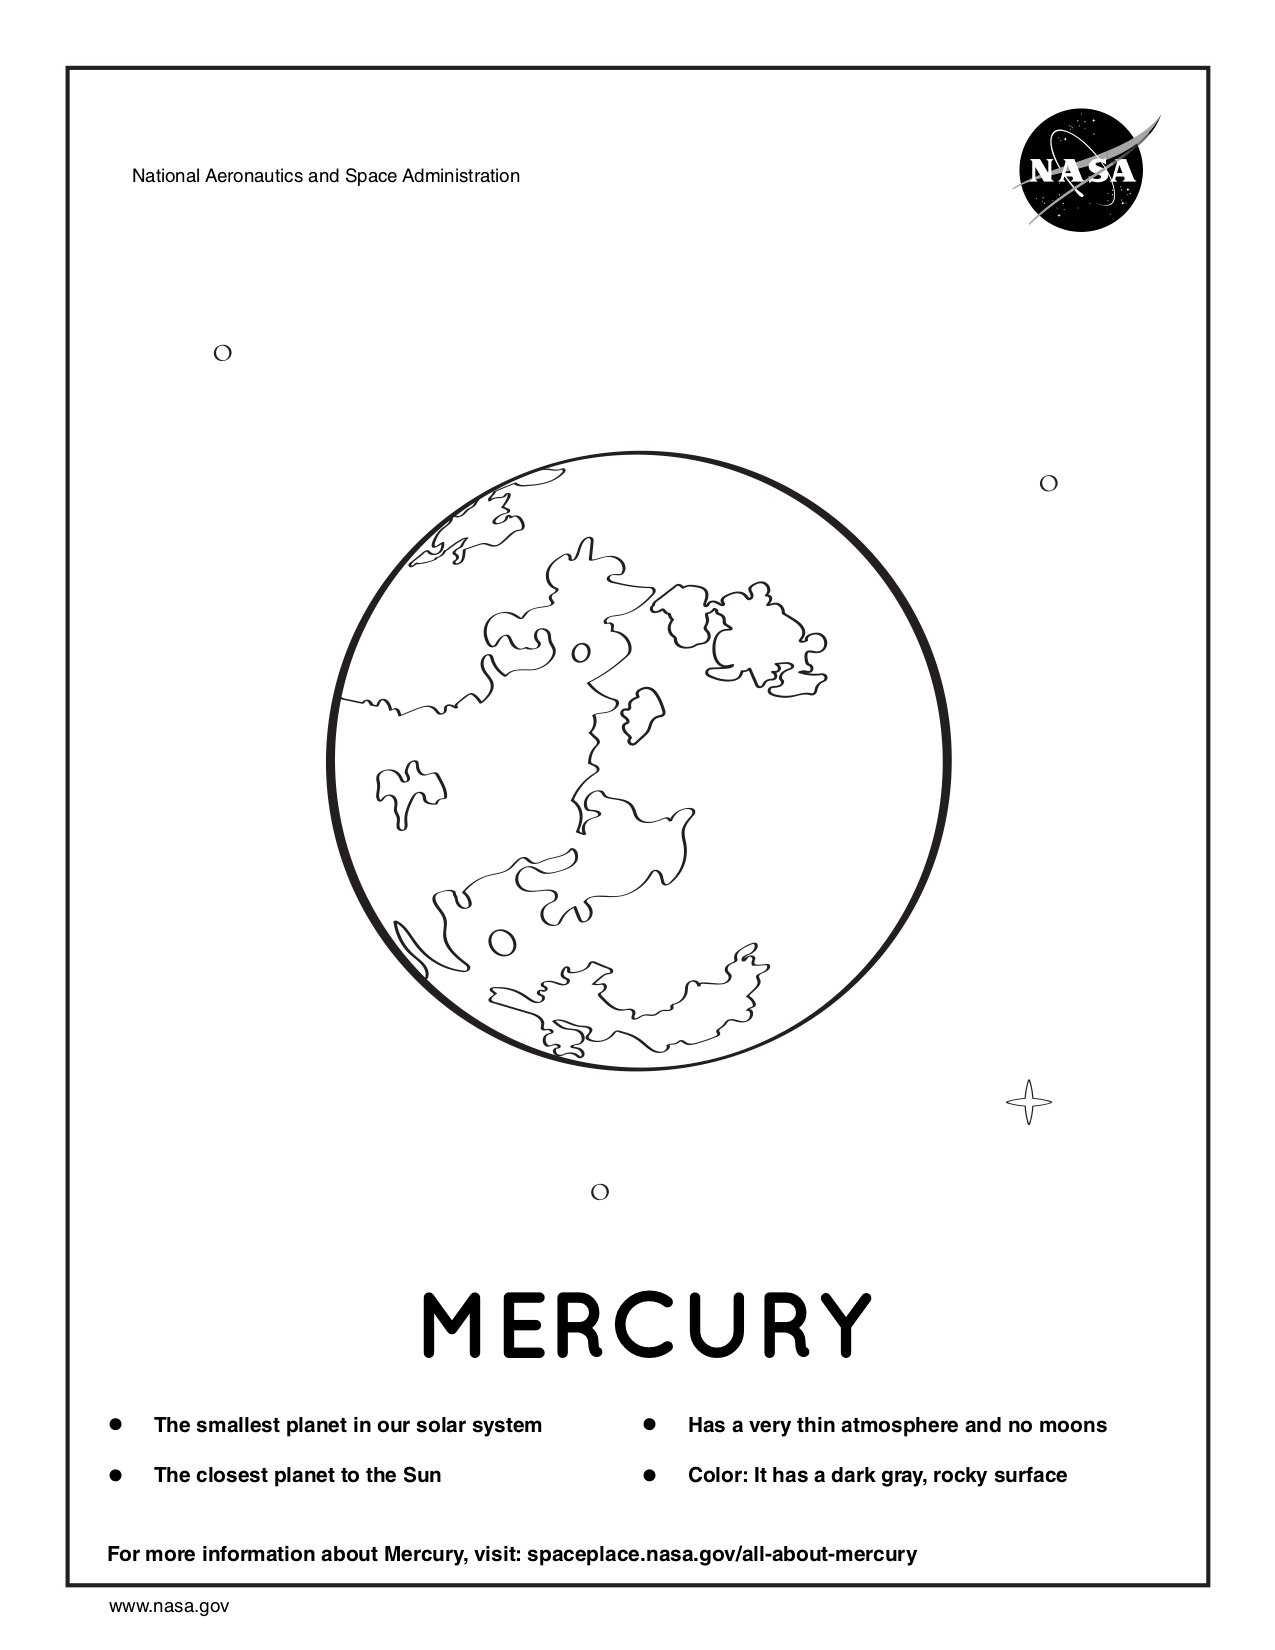 Coloring page for Mercury.